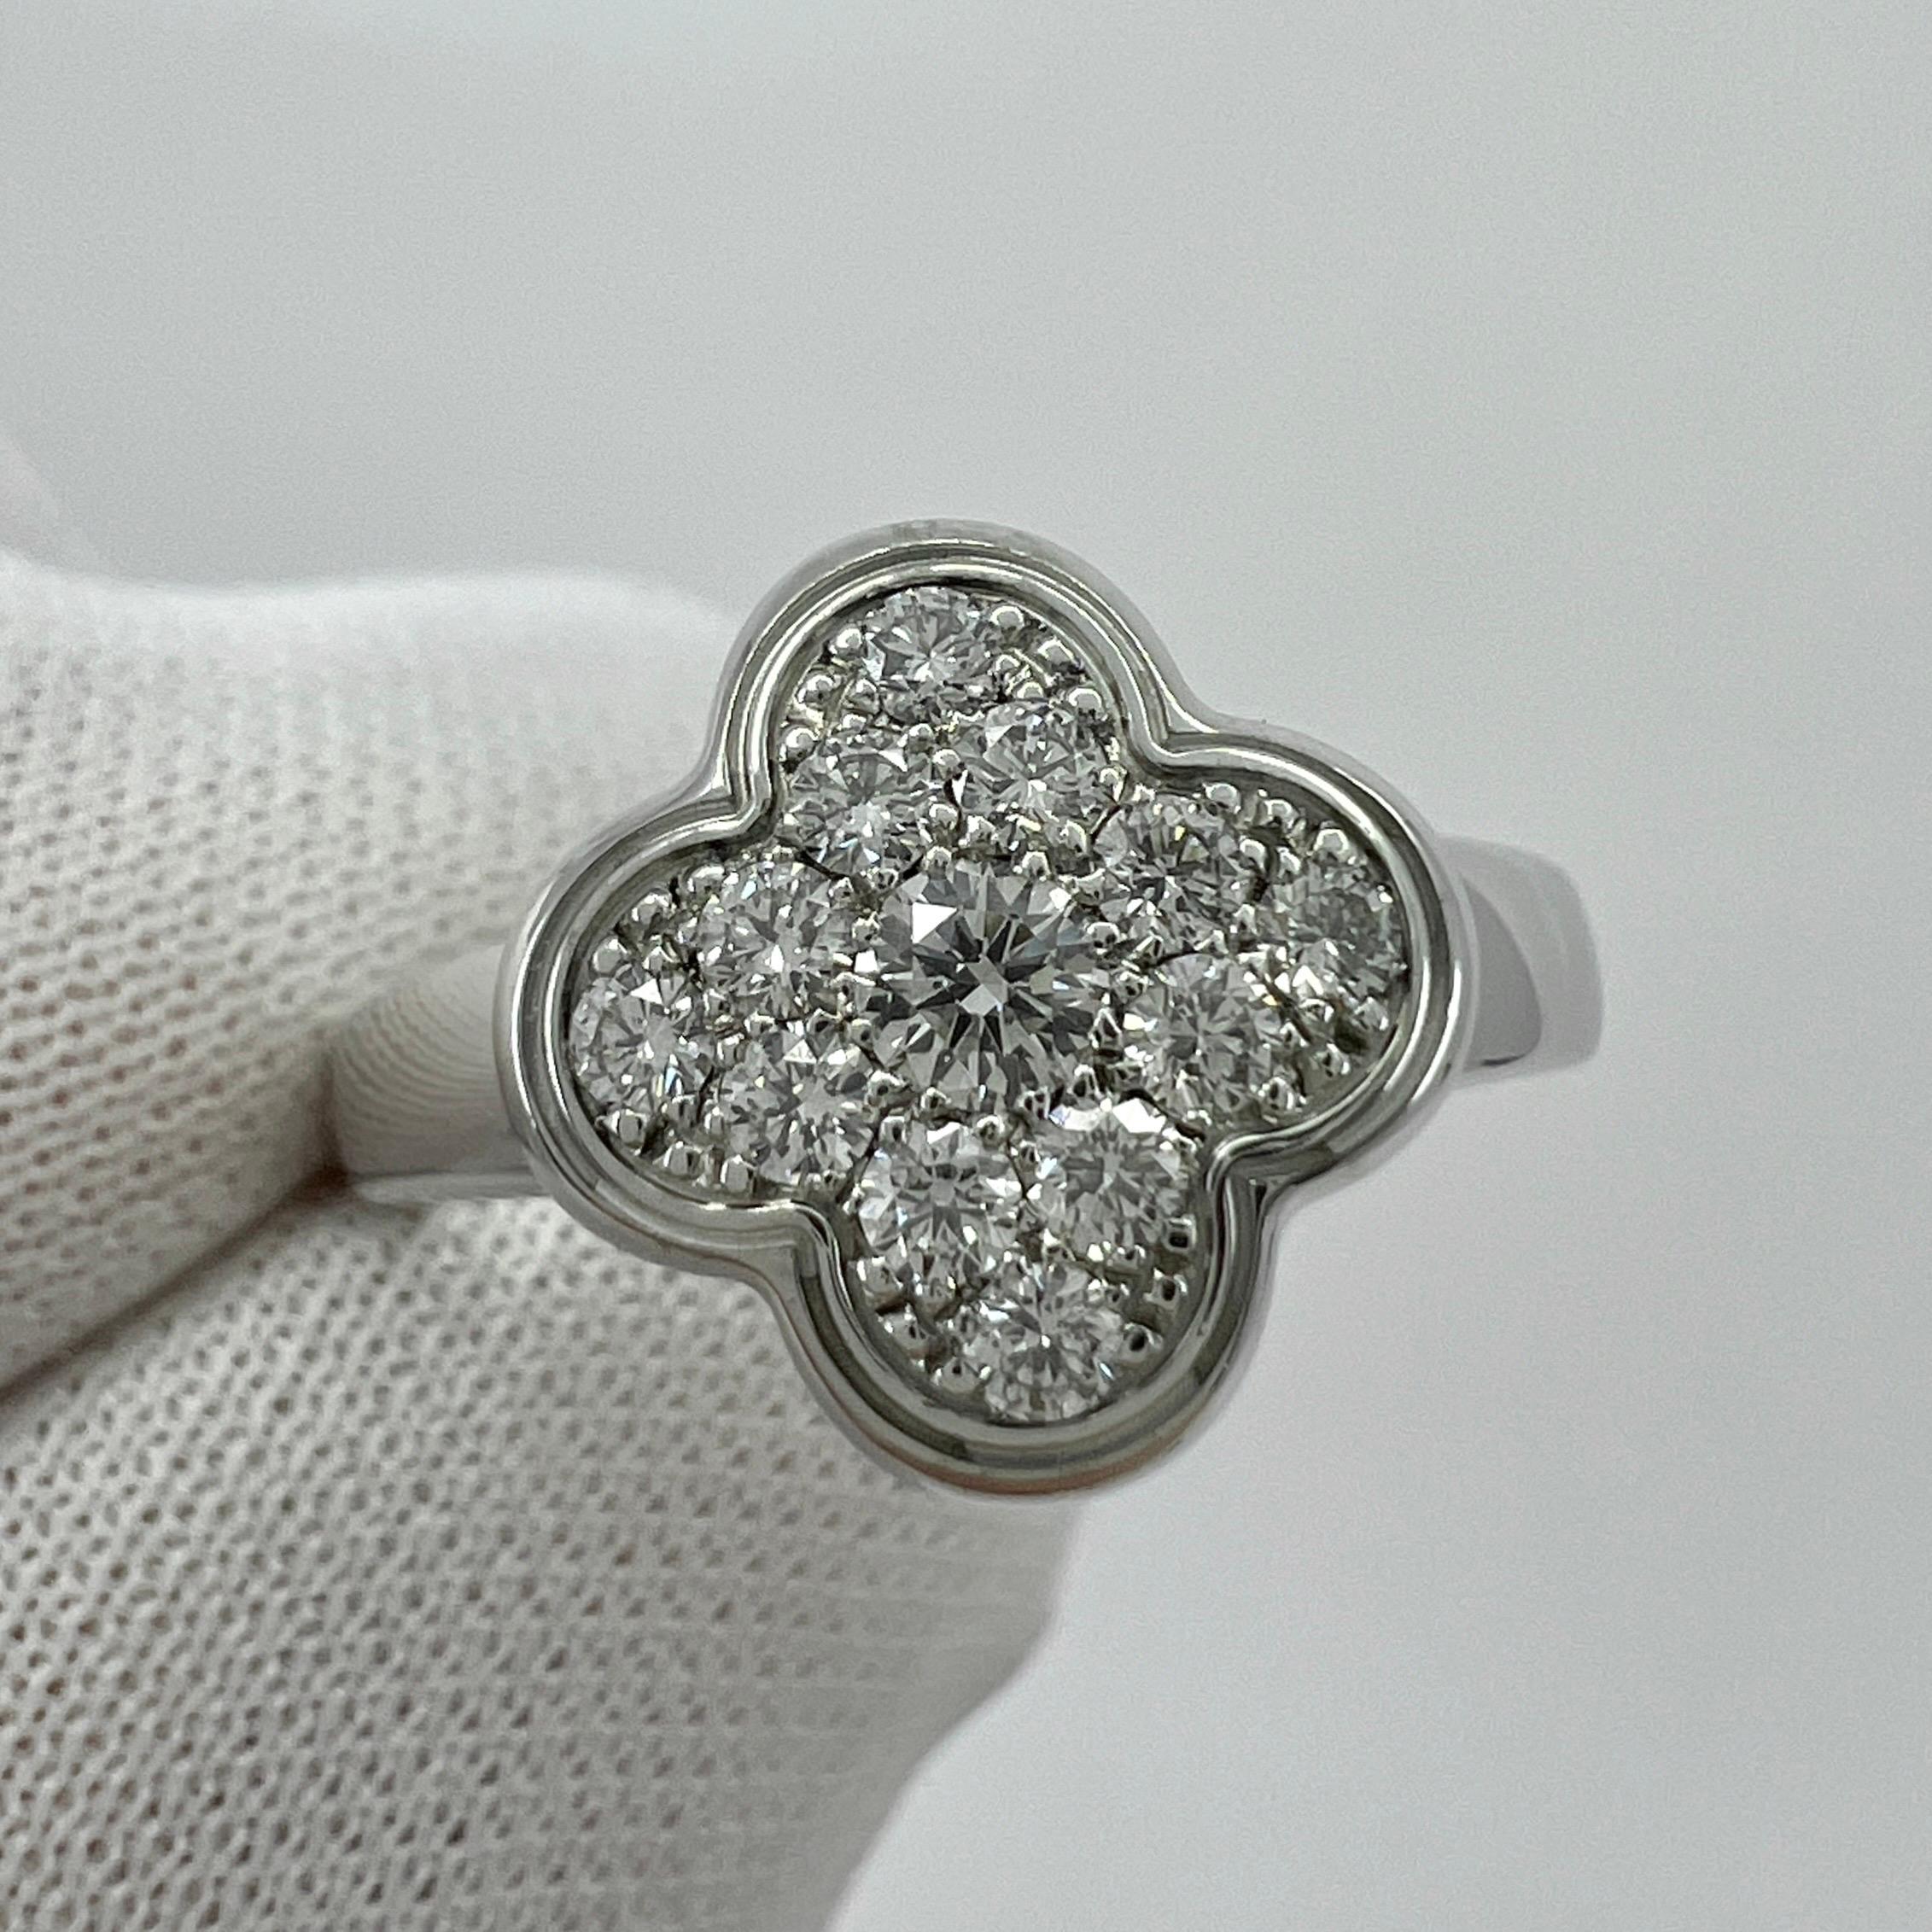 Vintage Van Cleef & Arpels Pure Alhambra Diamond 18 Karat White Gold Ring.

A stunning vintage ring from the Pure Alhambra range by fine French fine jewellery house Van Cleef & Arpels. 

The classic flower motif but filled with stunning pavé set